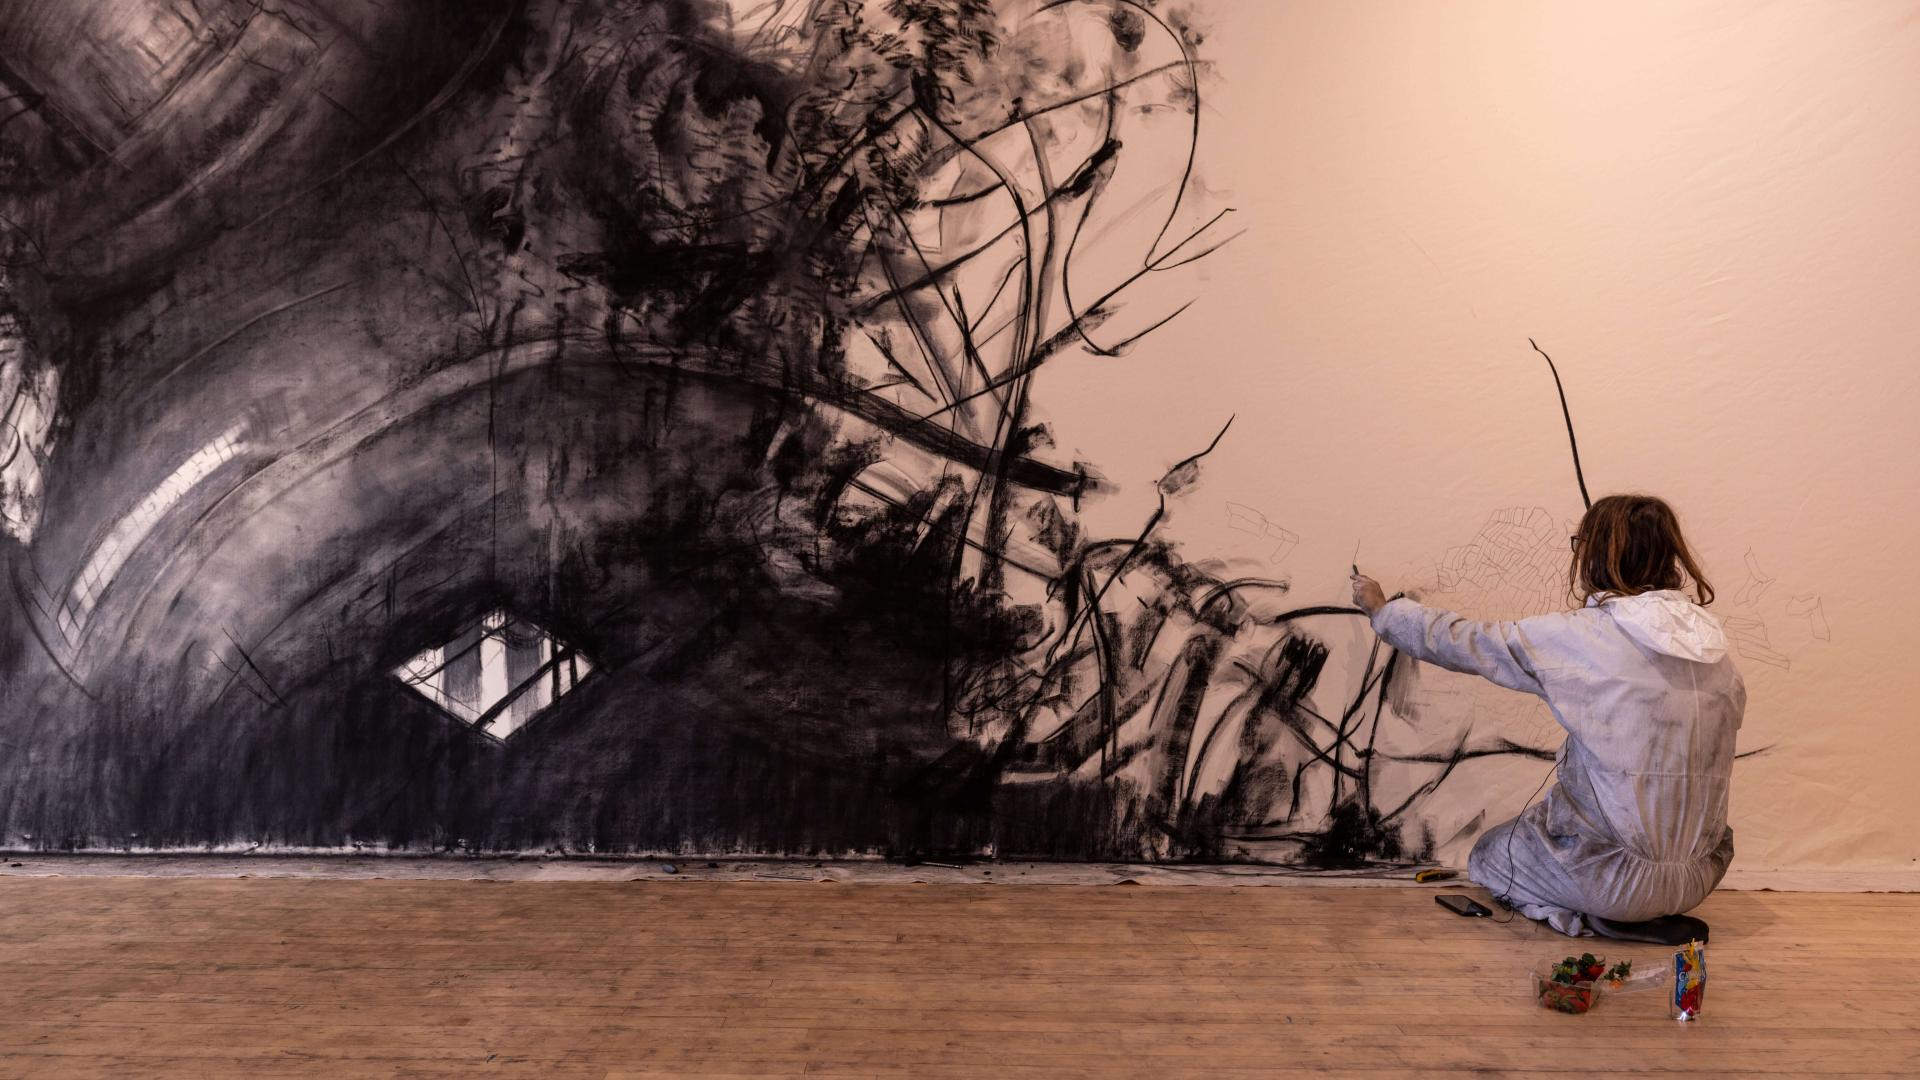 A person kneeling down and painting on a wall.